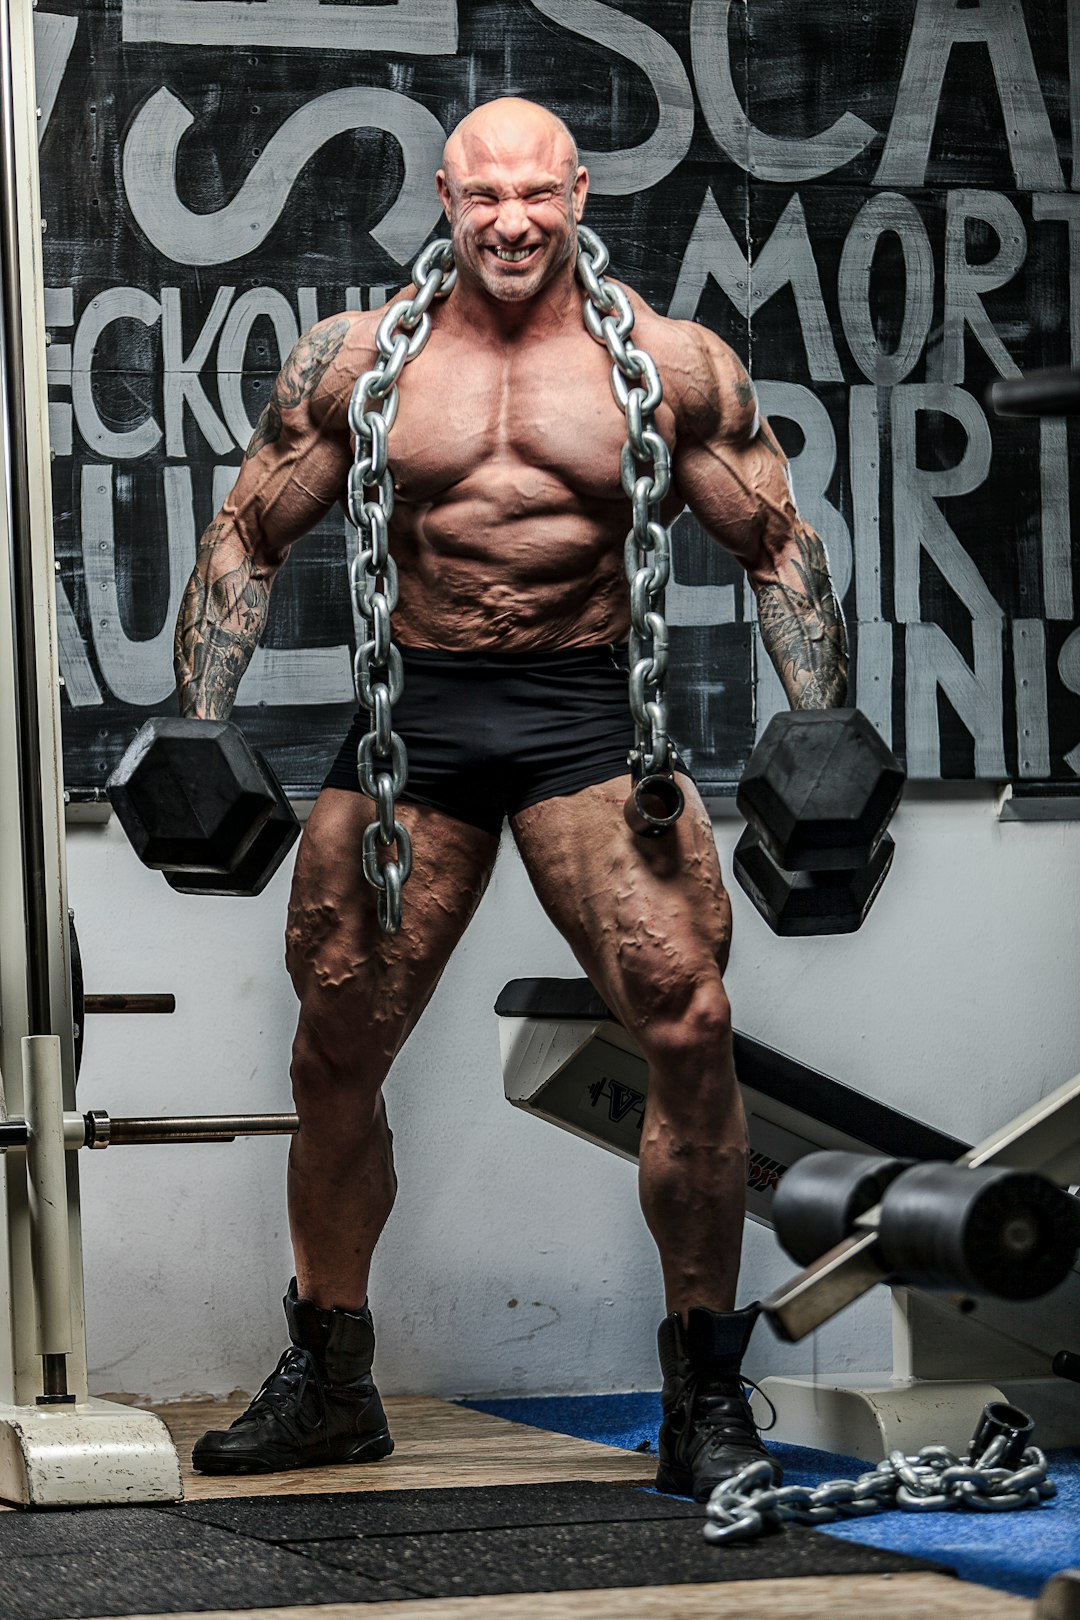 Bodybuilder lifting heavy weights with chain around his neck.